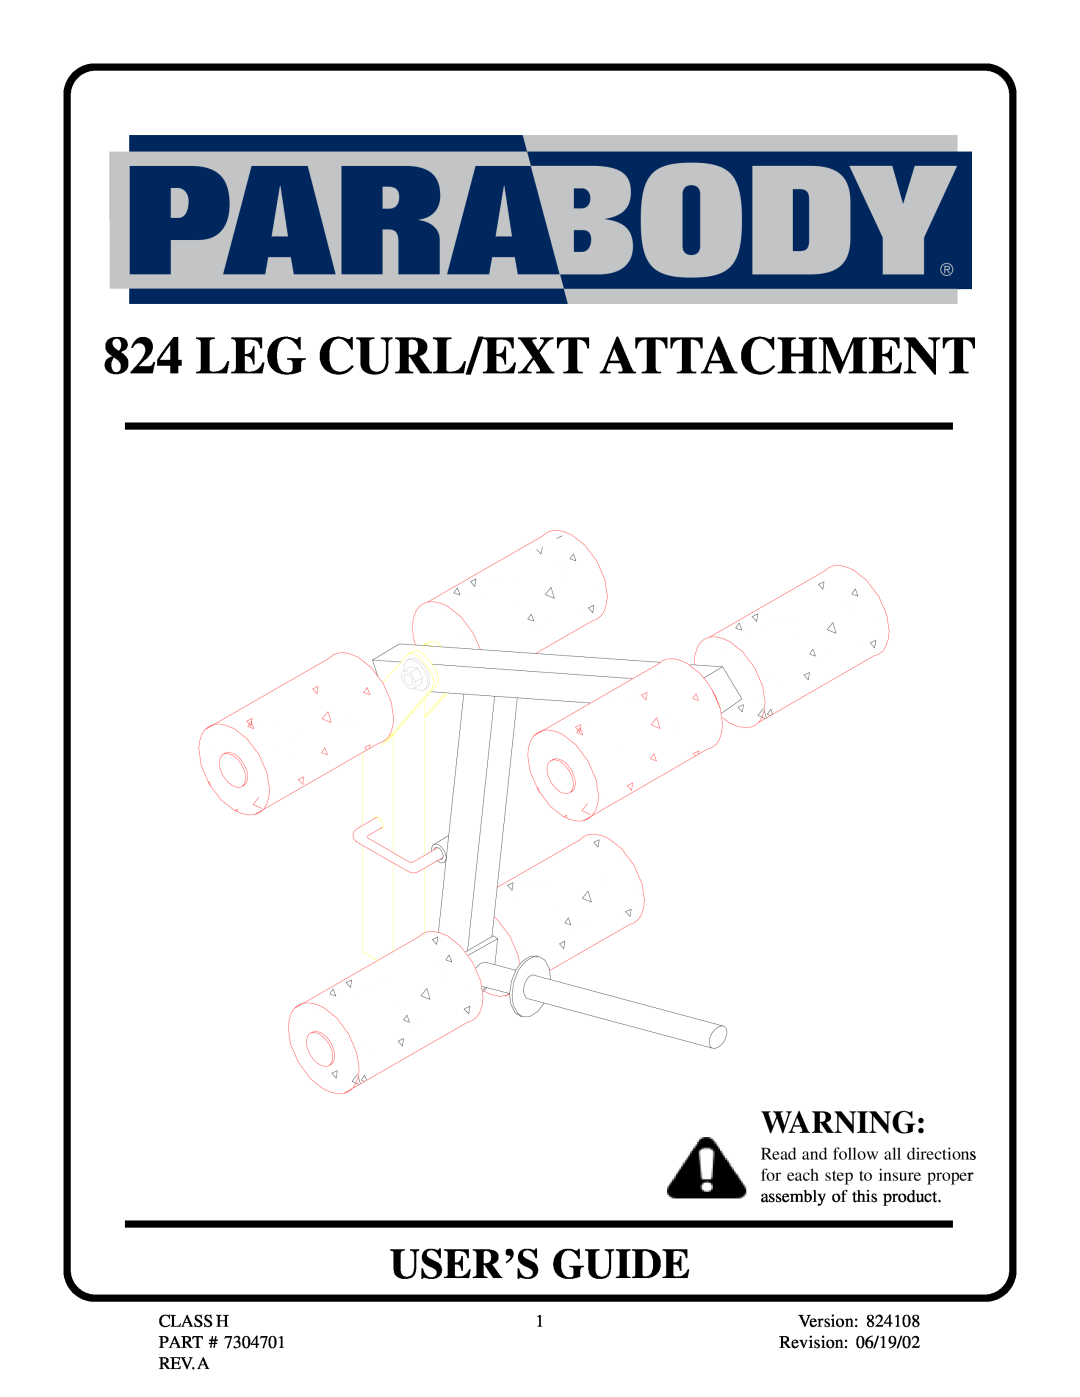 Life Fitness 824 manual User’S Guide, Leg Curl/Ext Attachment 